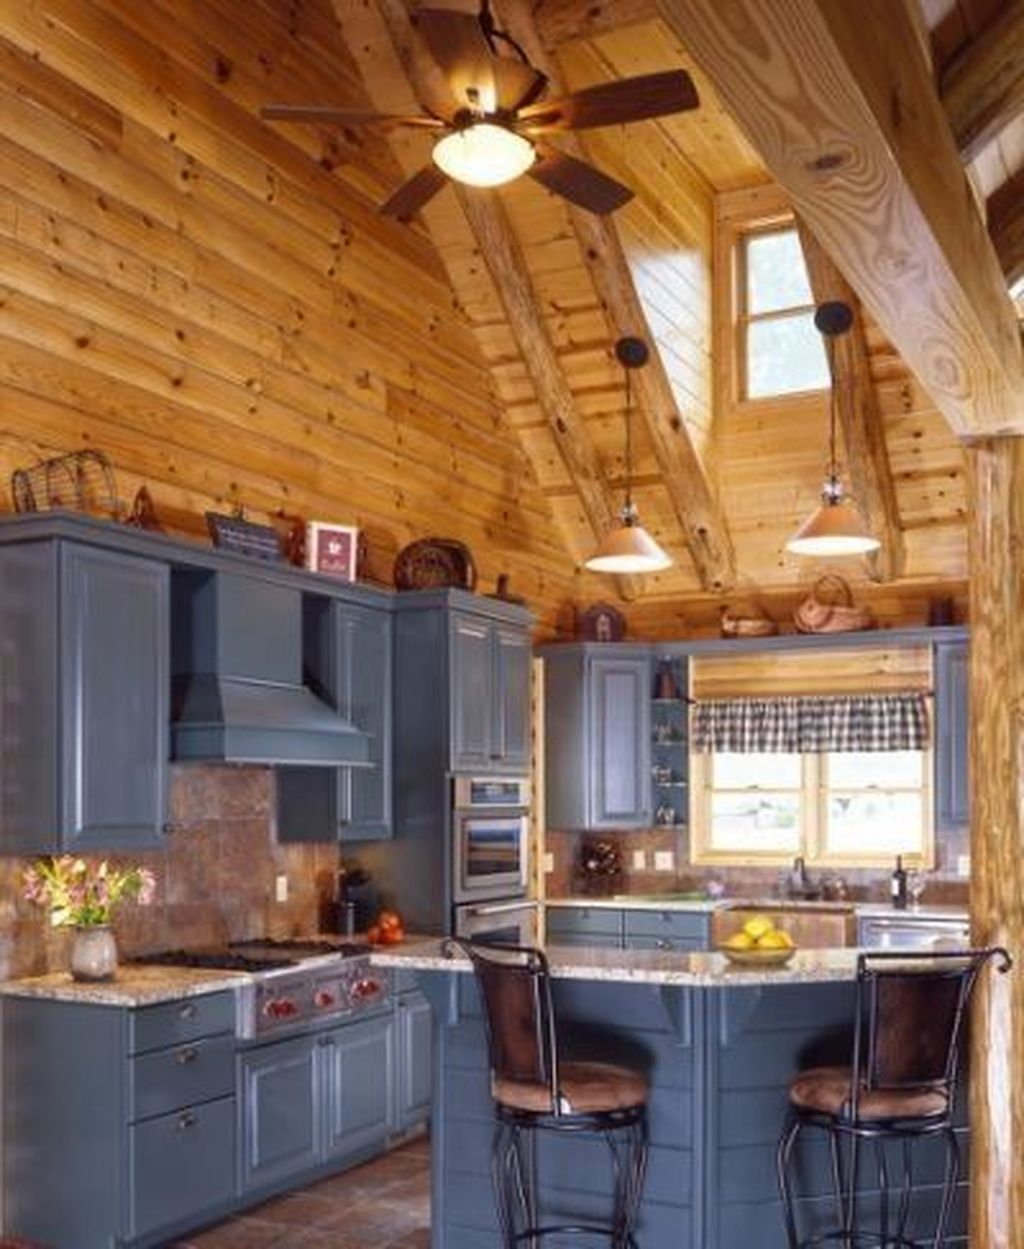 Gorgeous Log Cabin Style Home Interior Design08